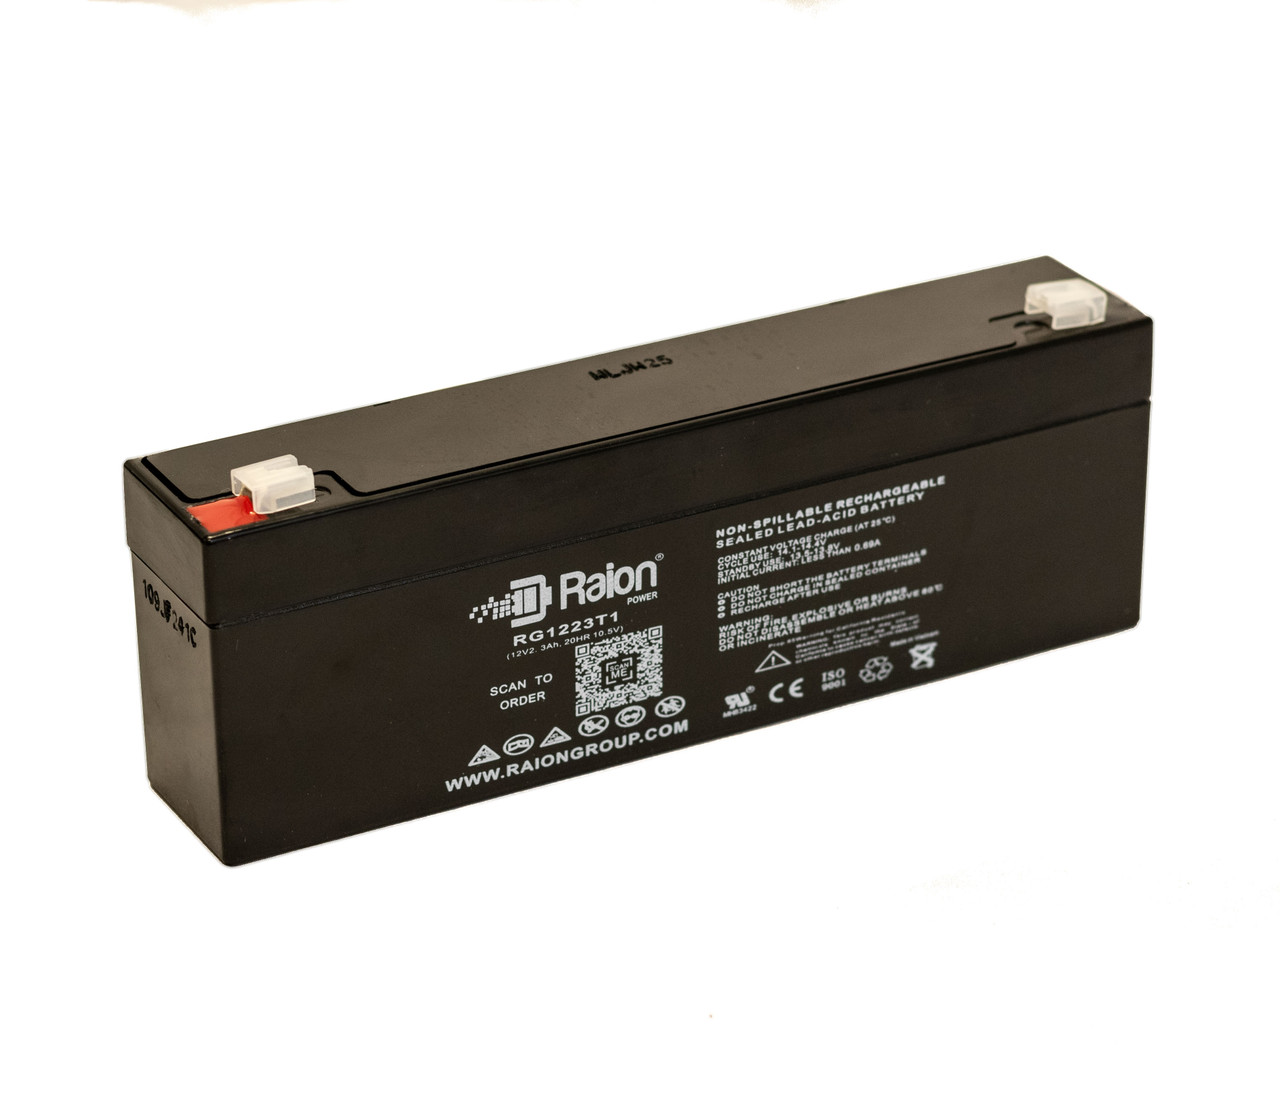 Raion Power RG1223T1 Replacement Battery for Bright Way Group BWG 1222